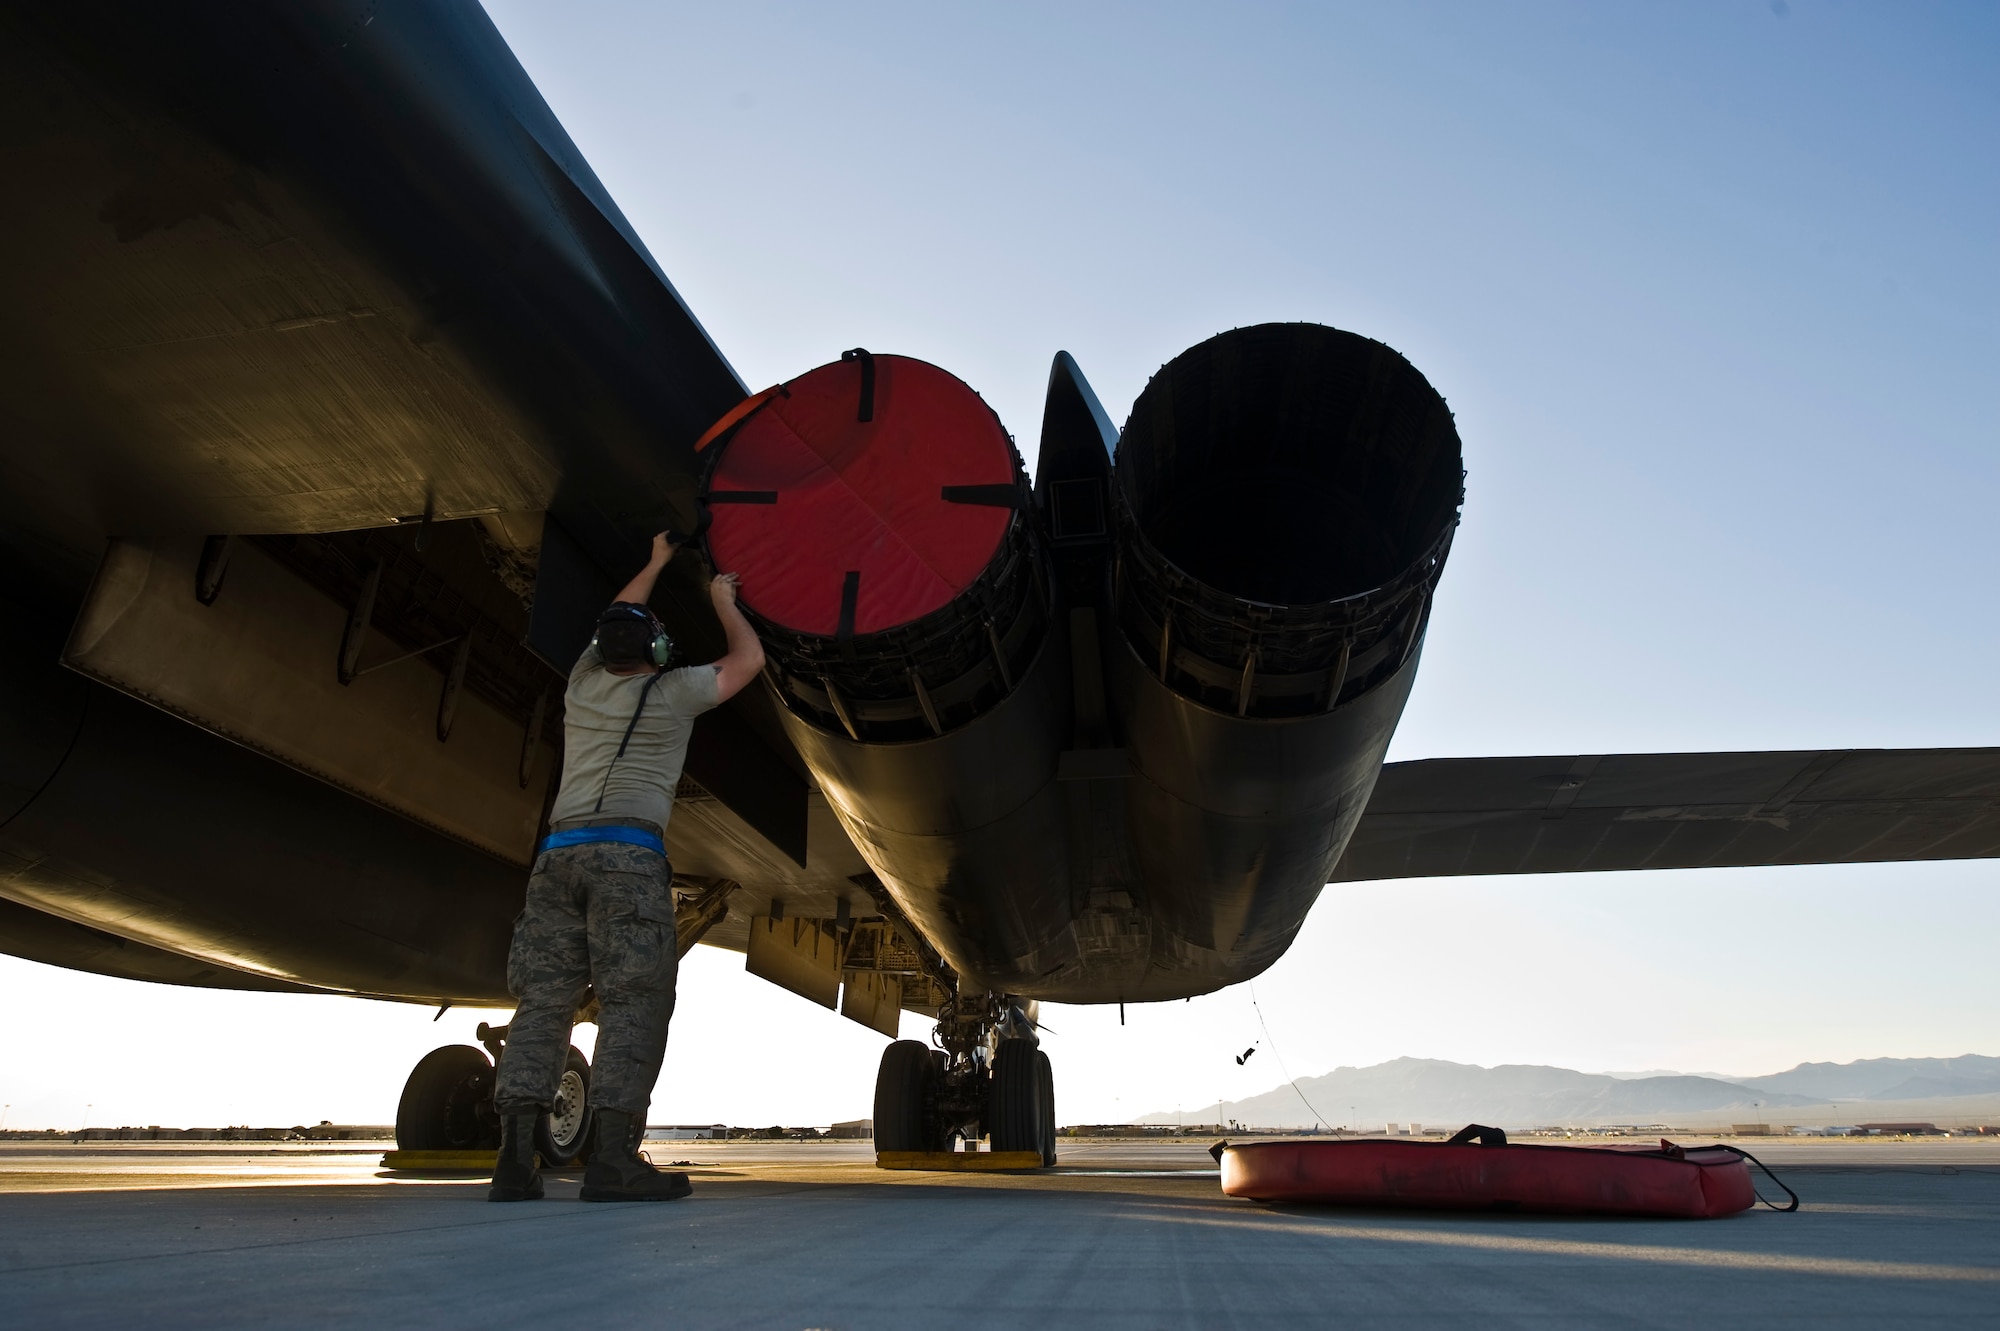 Senior Airman Andrew Lawson, 7th Aircraft Maintenance Squadron aerospace propulsion journeyman, places exhaust plugs on a B-1B Lancer assigned to the 7th Bomb Wing, Dyess Air Force Base, Texas during Green Flag 14-6 April 24, 2014, at Nellis Air Force Base, Nev. Green Flag is a realistic air-land integration combat training exercise that involves the U.S. and its allies. (U.S. Air Force photo by Senior Airman Christopher Tam)